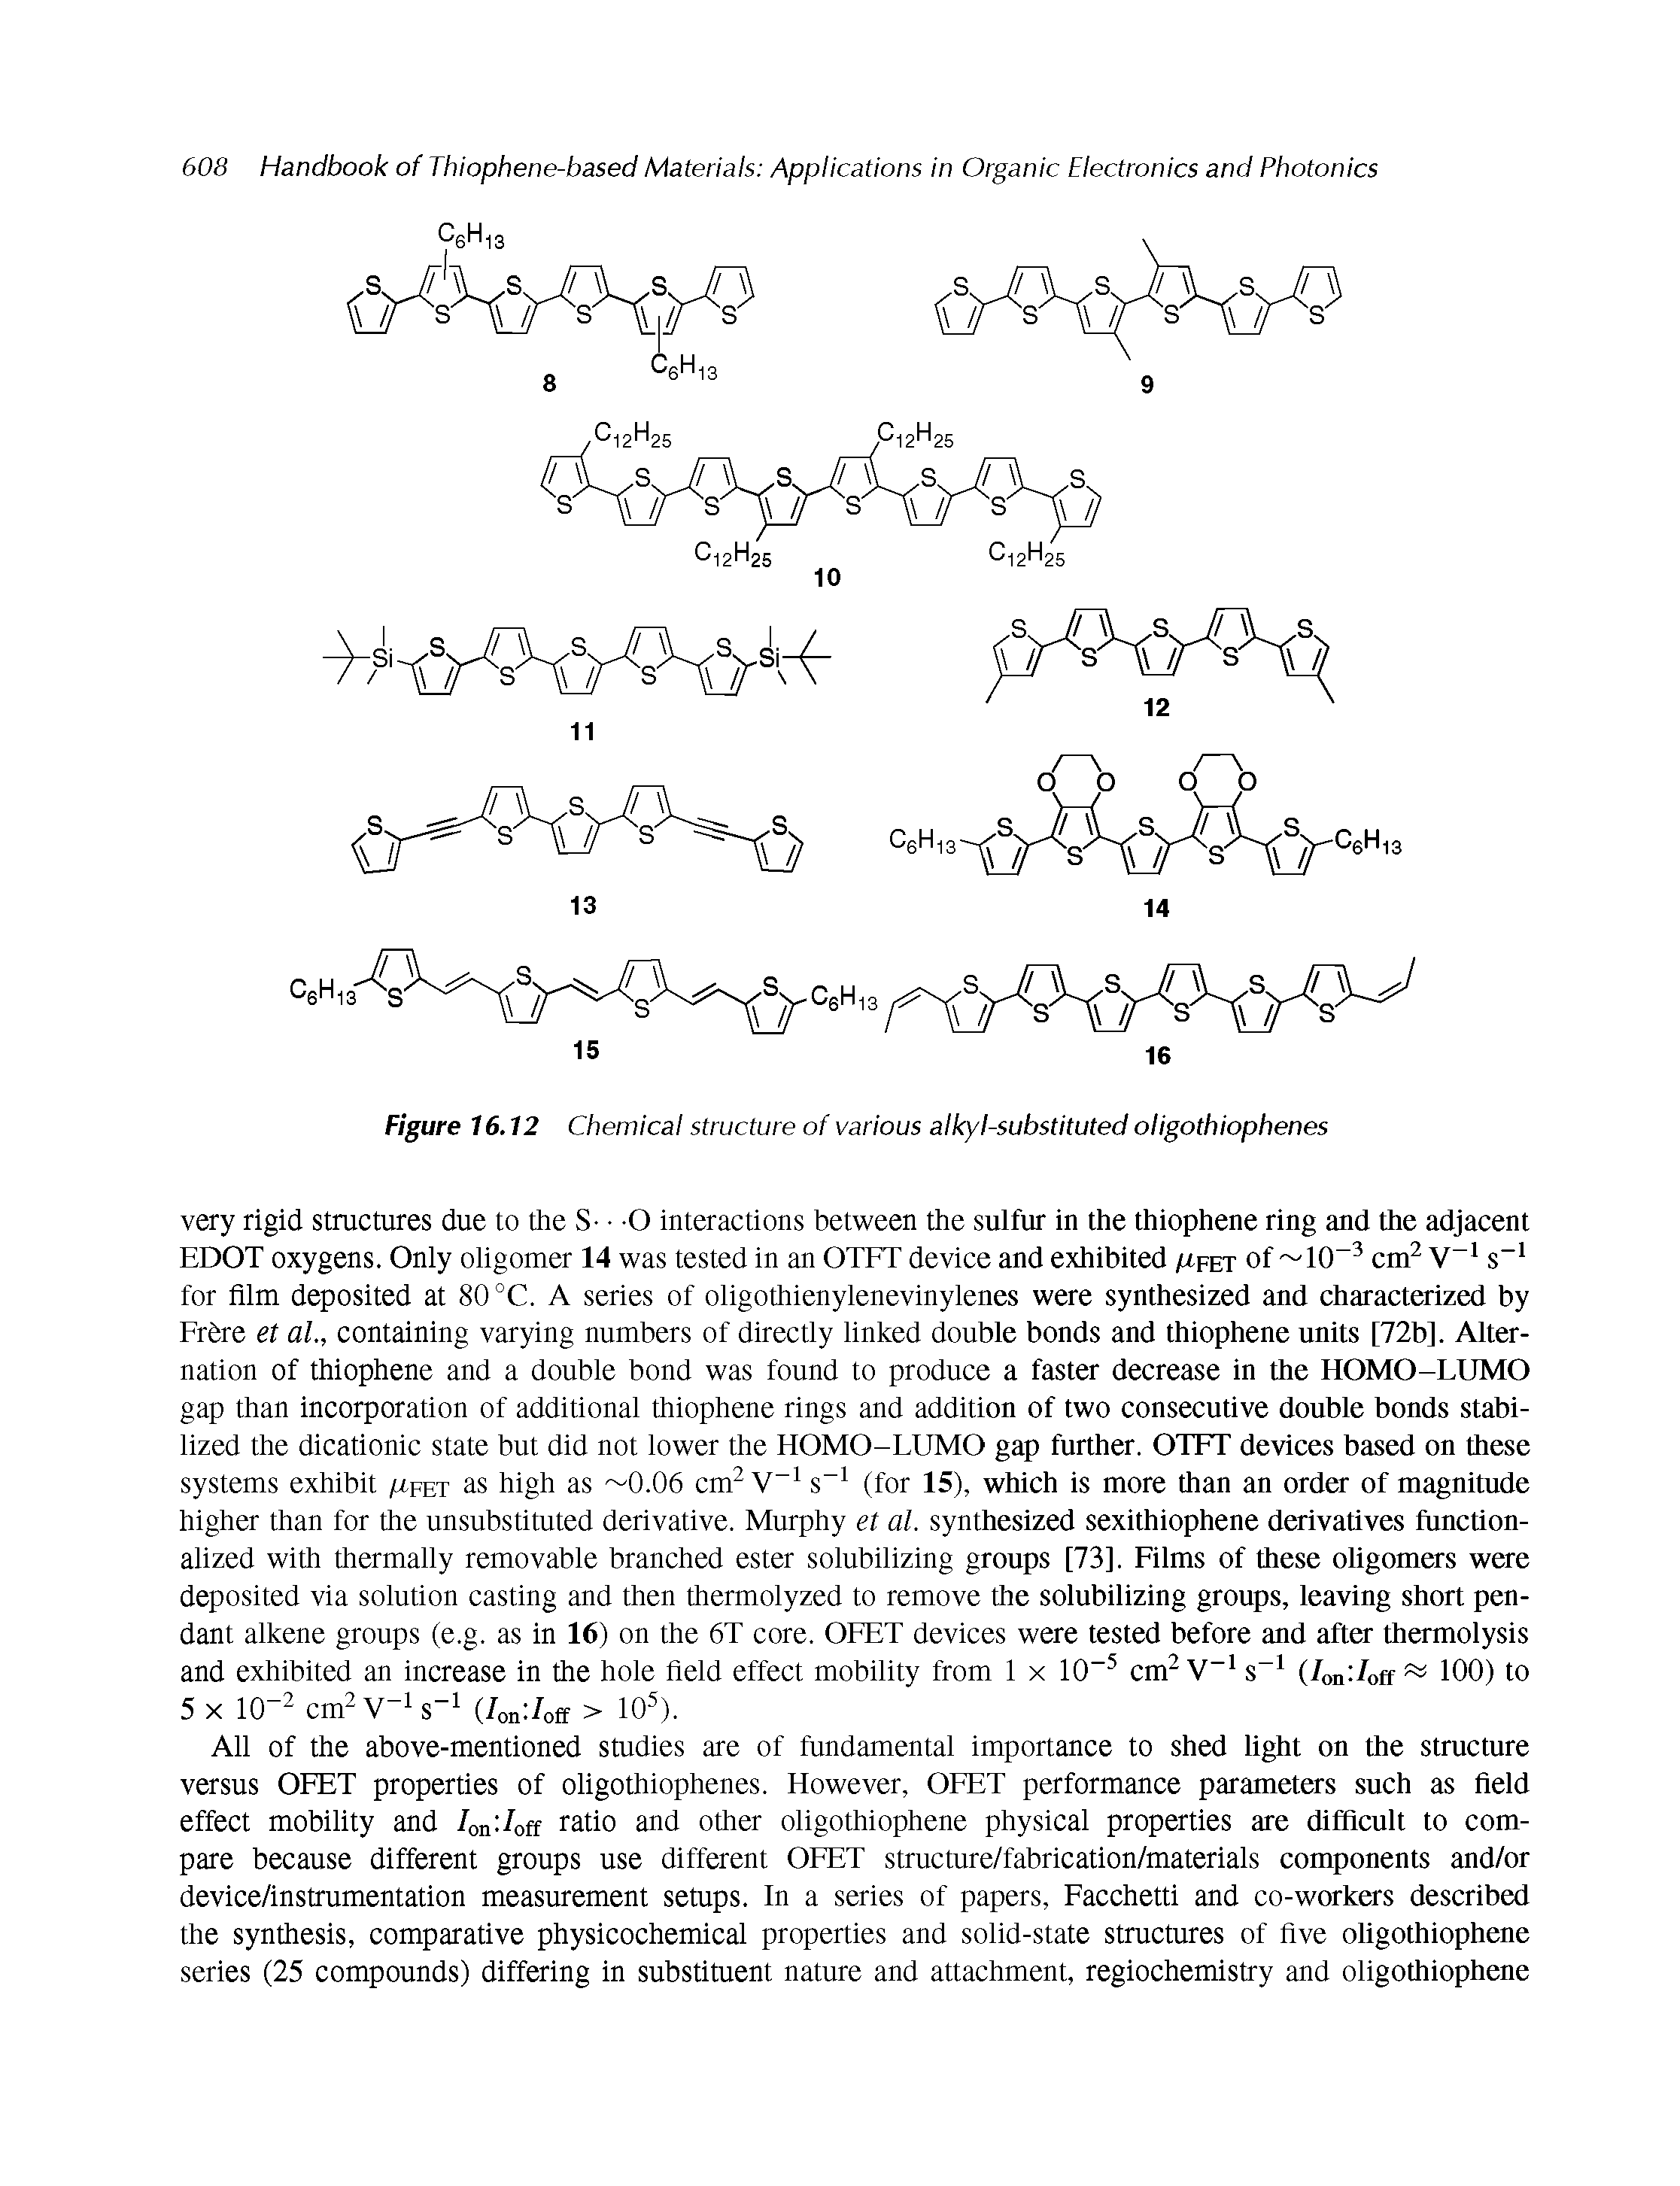 Figure 16.12 Chemical structure of various alkyl-substituted oligothiophenes...